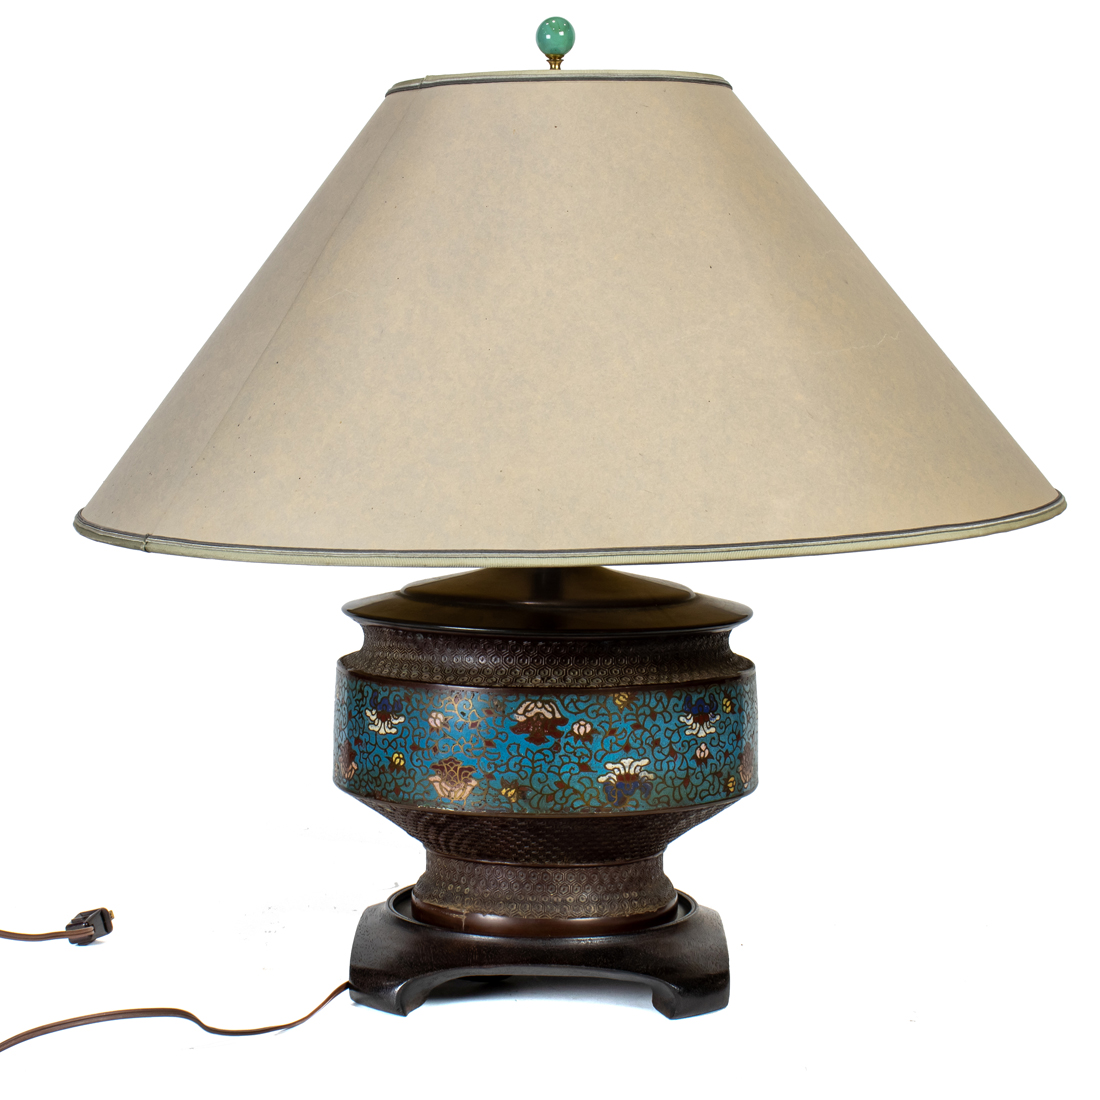 A JAPANESE CHAMPLEVE LAMP IN THE 2d30a2